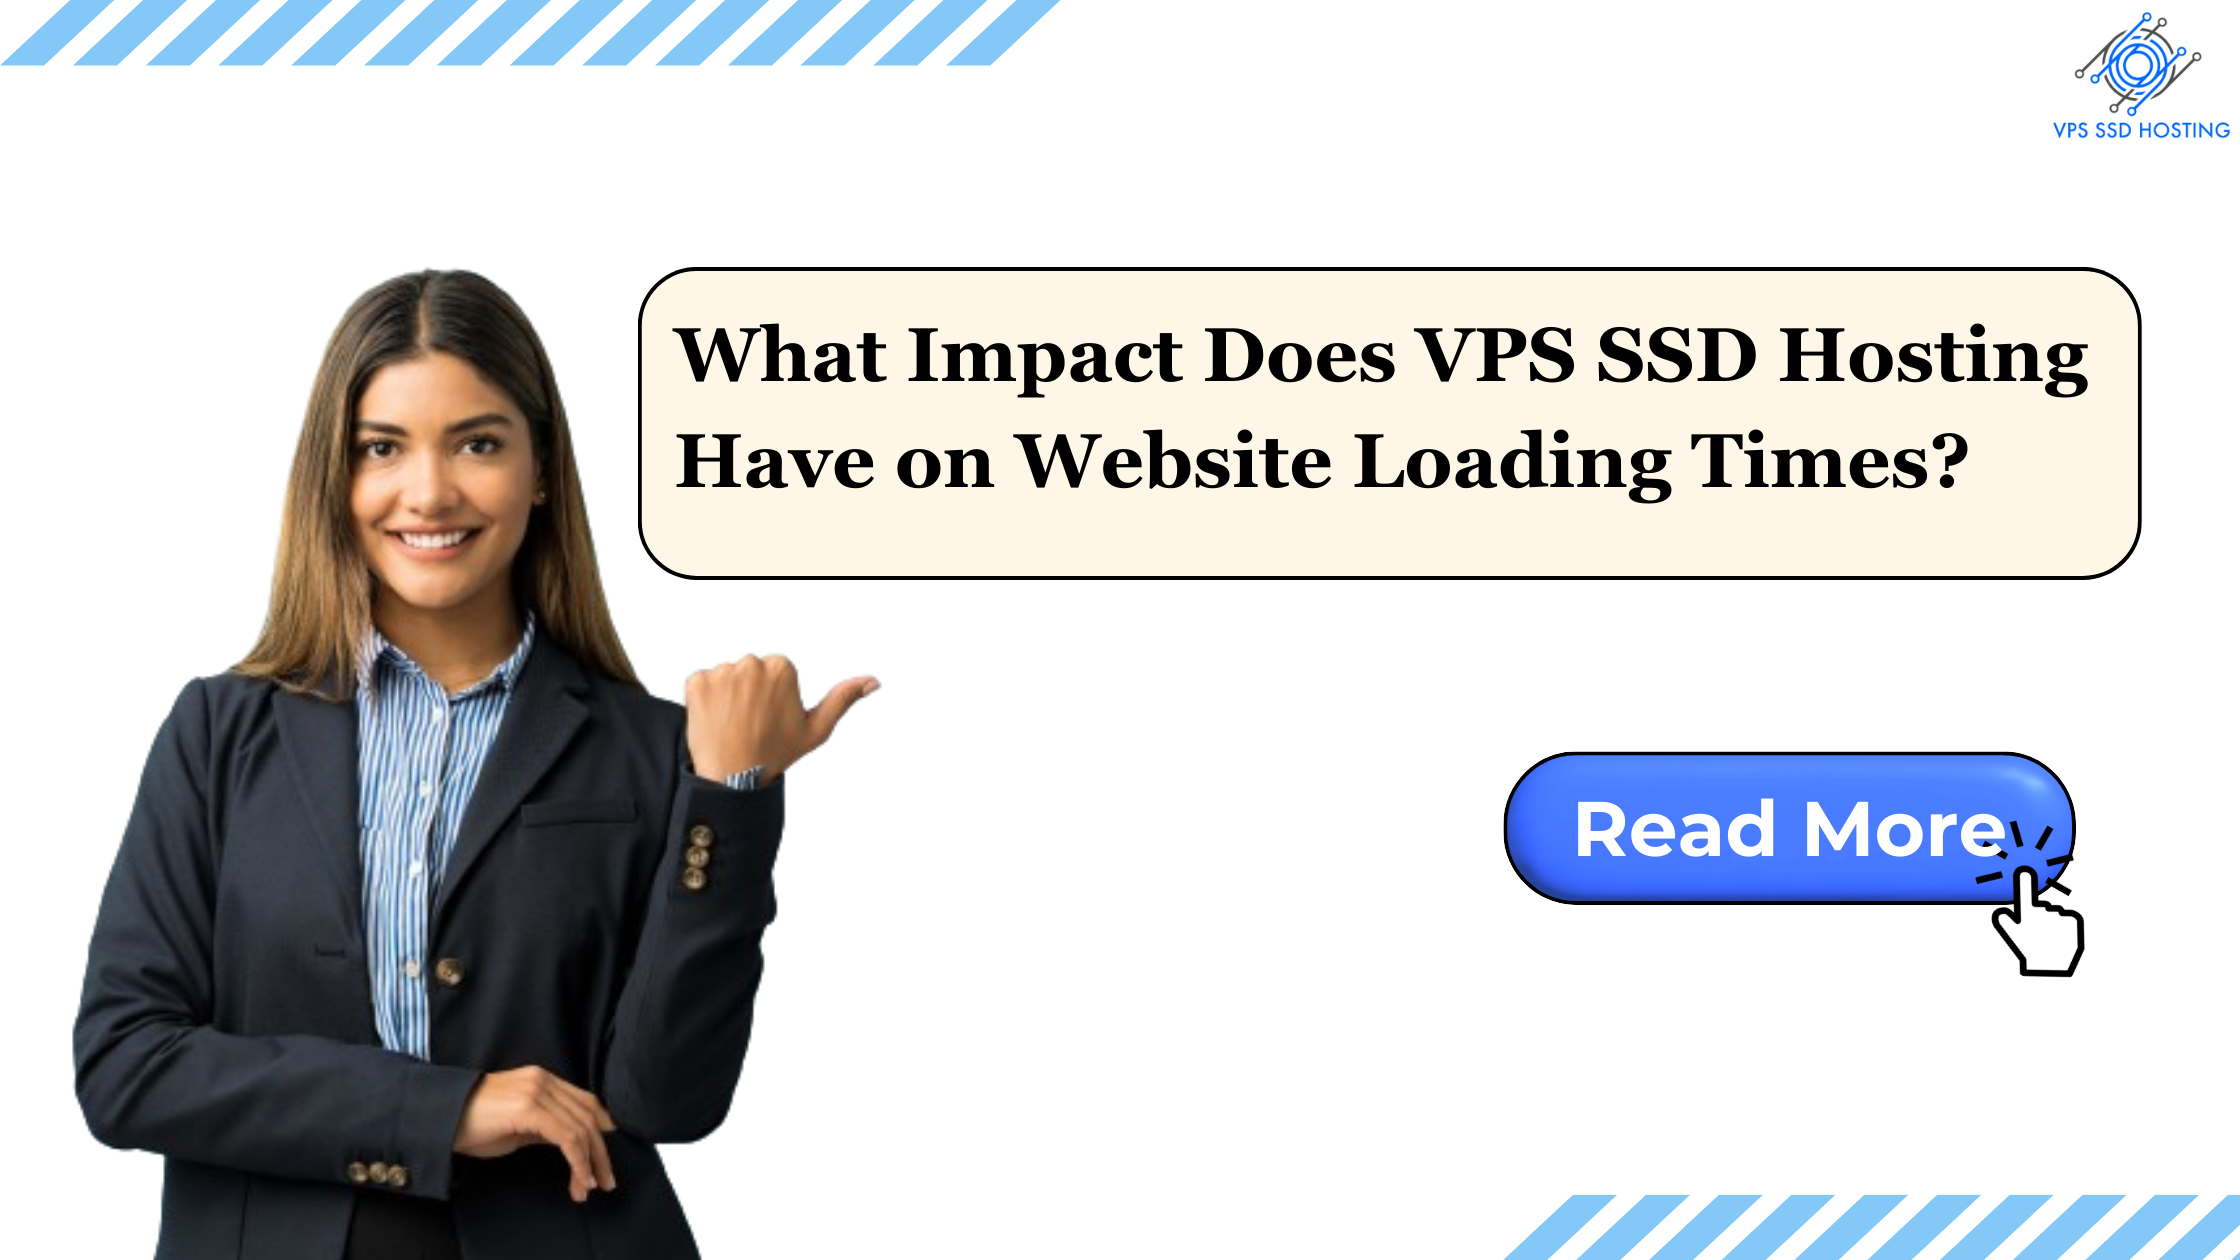 What Impact Does VPS SSD Hosting Have on Website Loading Times?